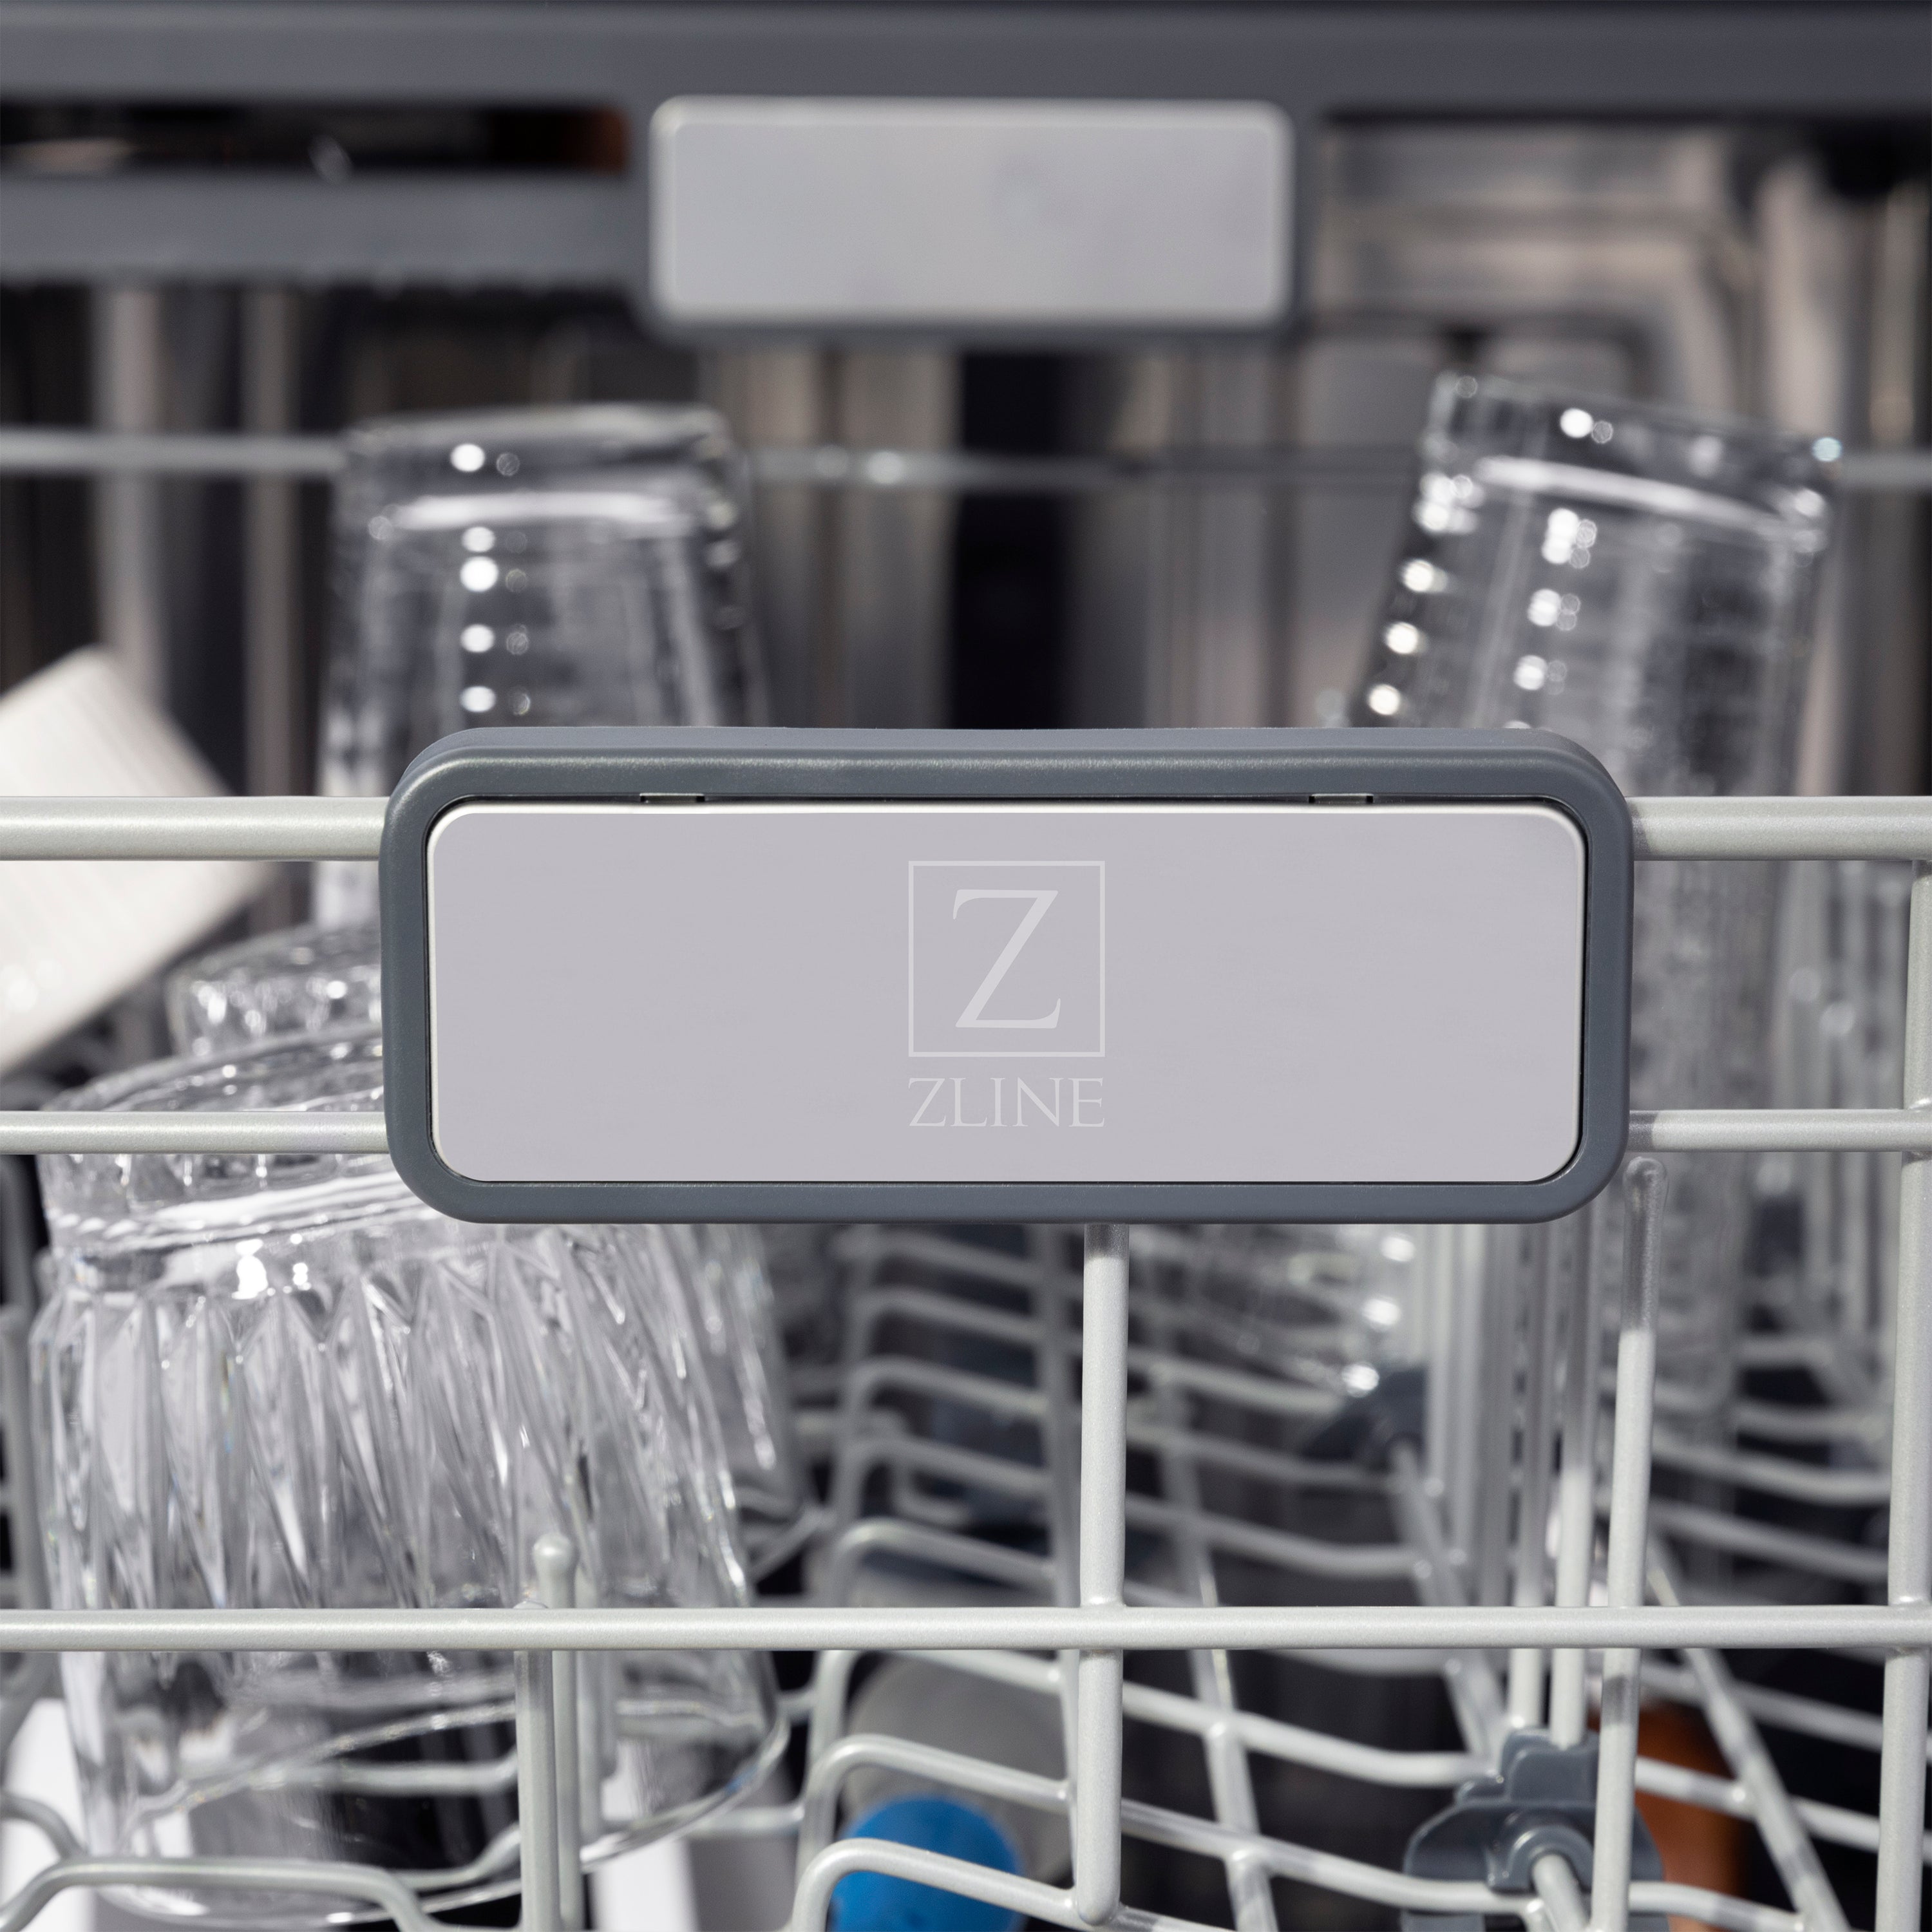 ZLINE Autograph Edition 24" 3rd Rack Top Control Built-In Tall Tub Dishwasher in Stainless Steel with Matte Black Handle, 45dBa (DWMTZ-304-24-MB)